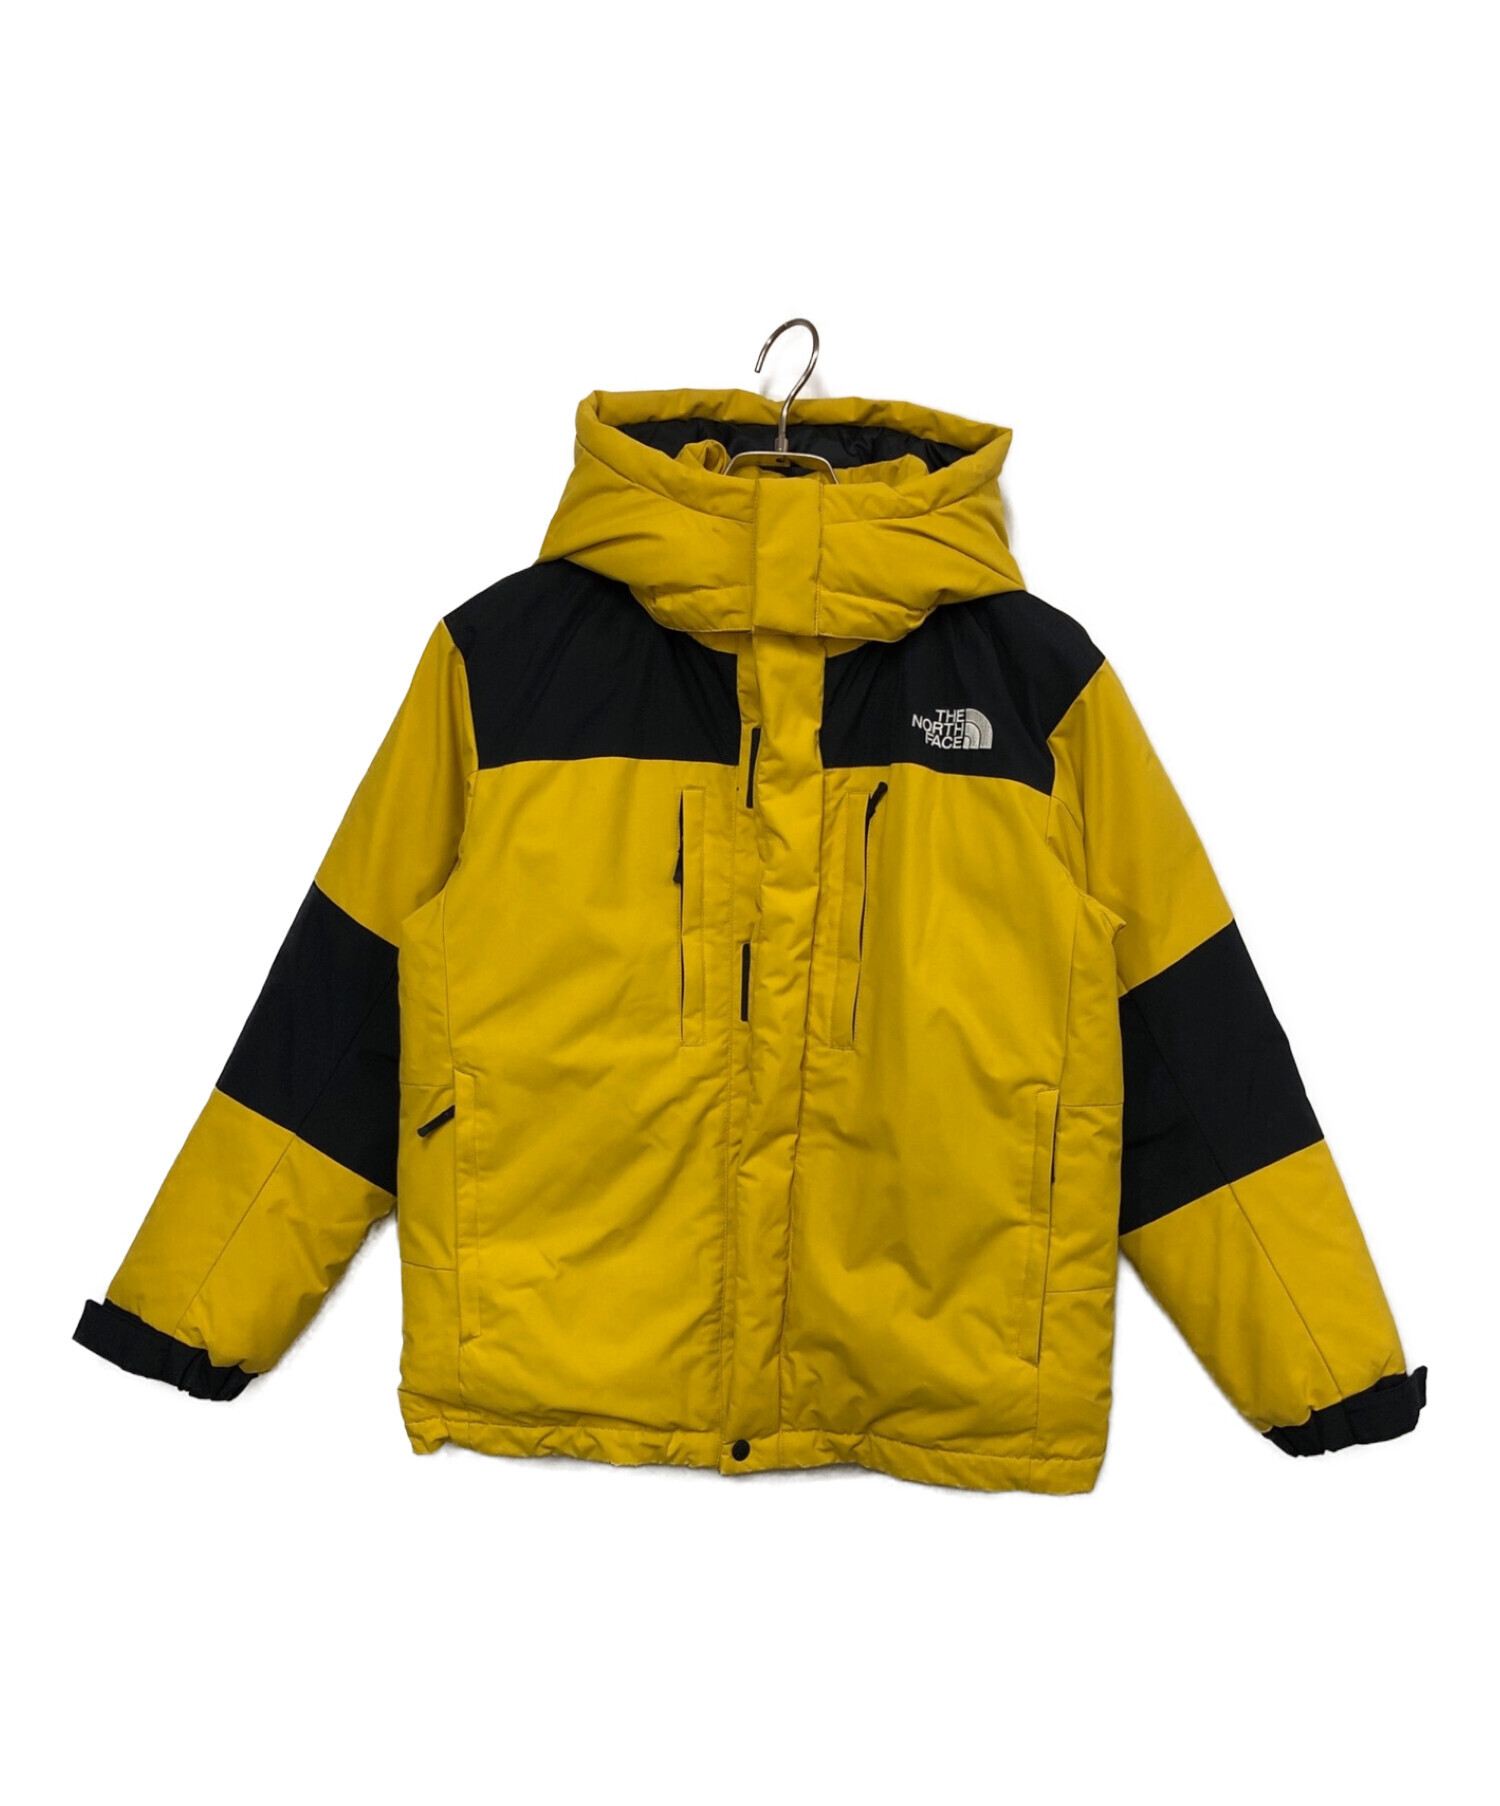 THE NORTH FACE バルトロ 150cm